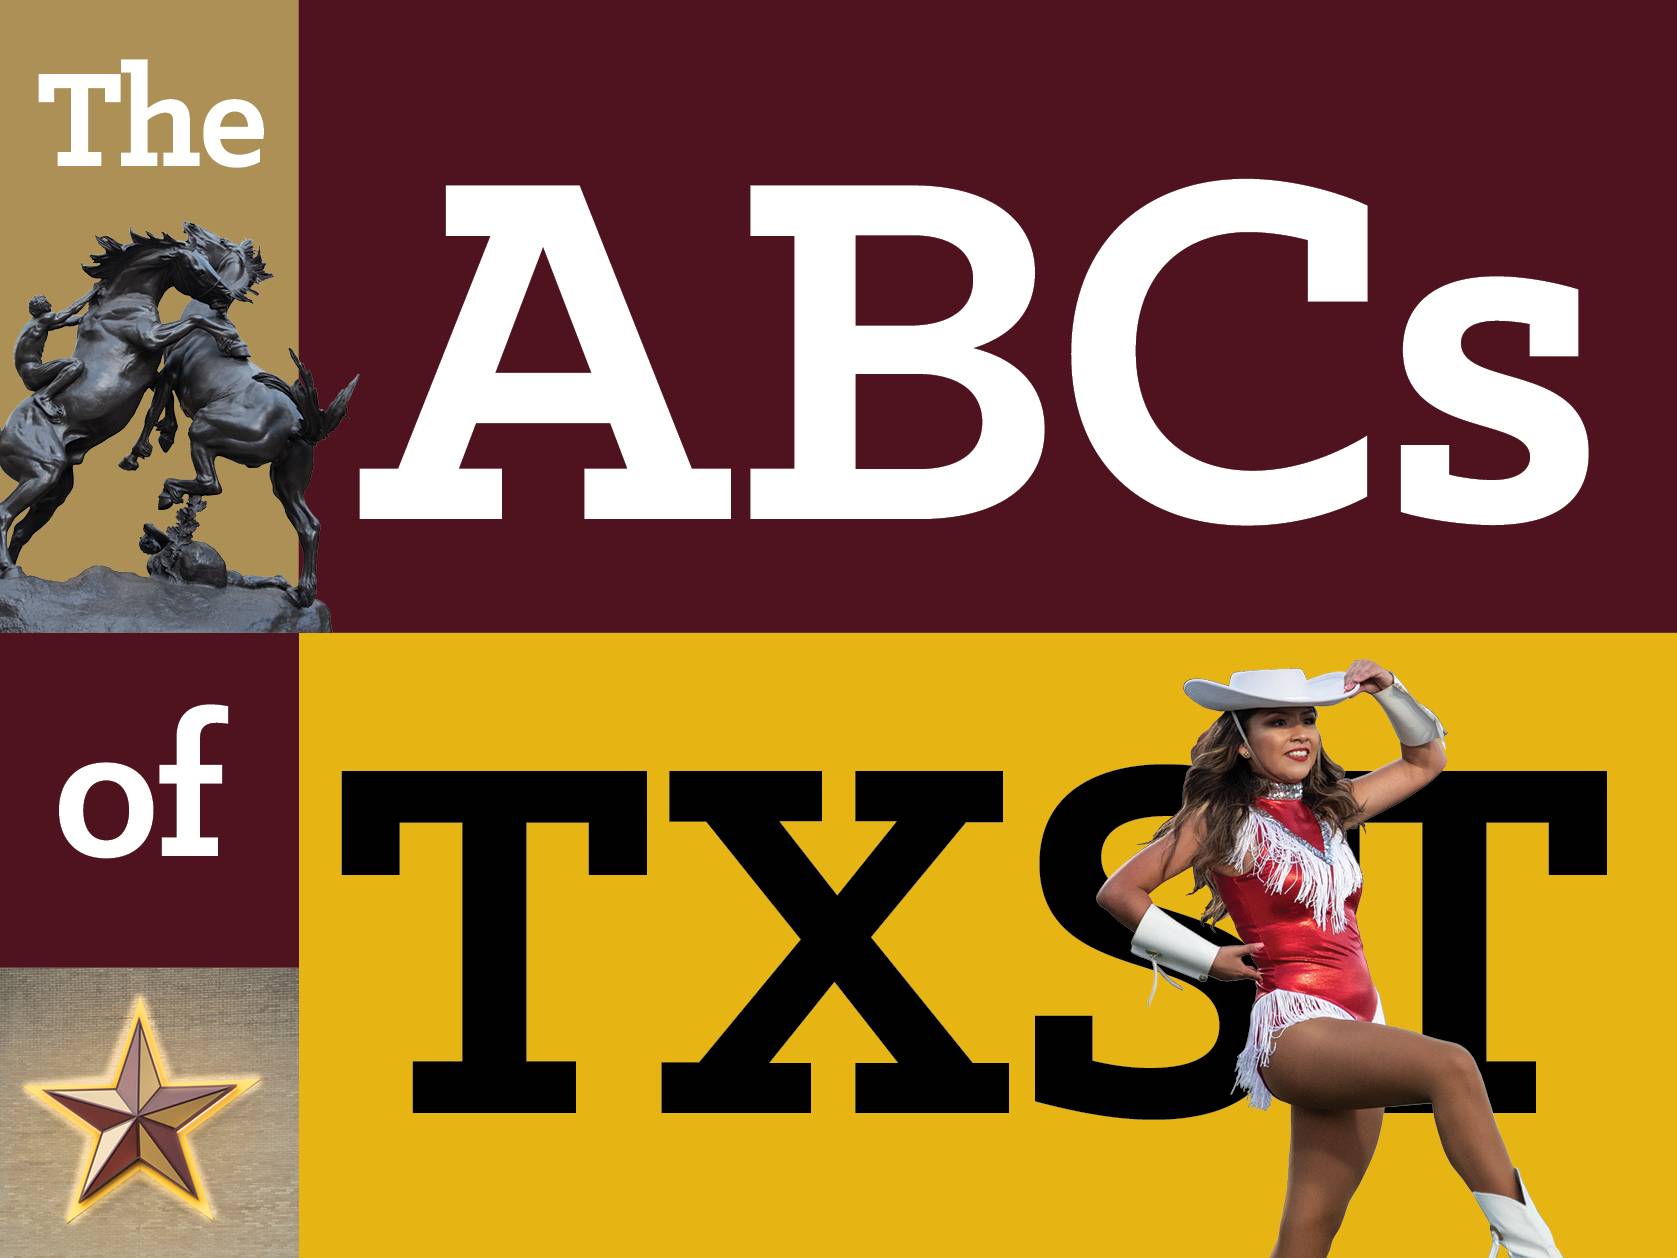 graphic reading "the ABCs of txst"